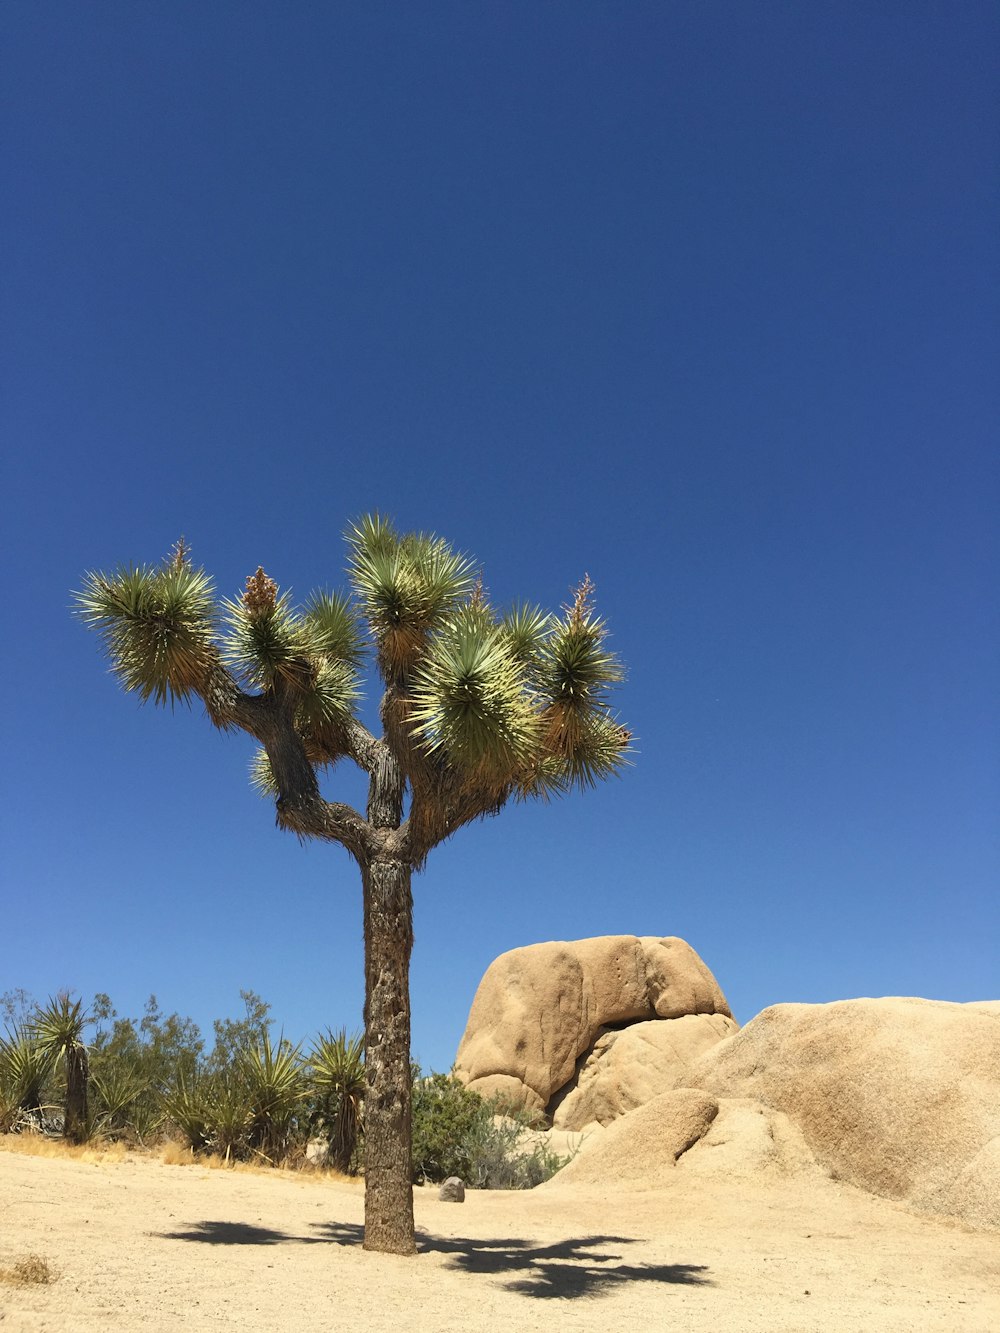 green palm tree near brown rock formation under blue sky during daytime